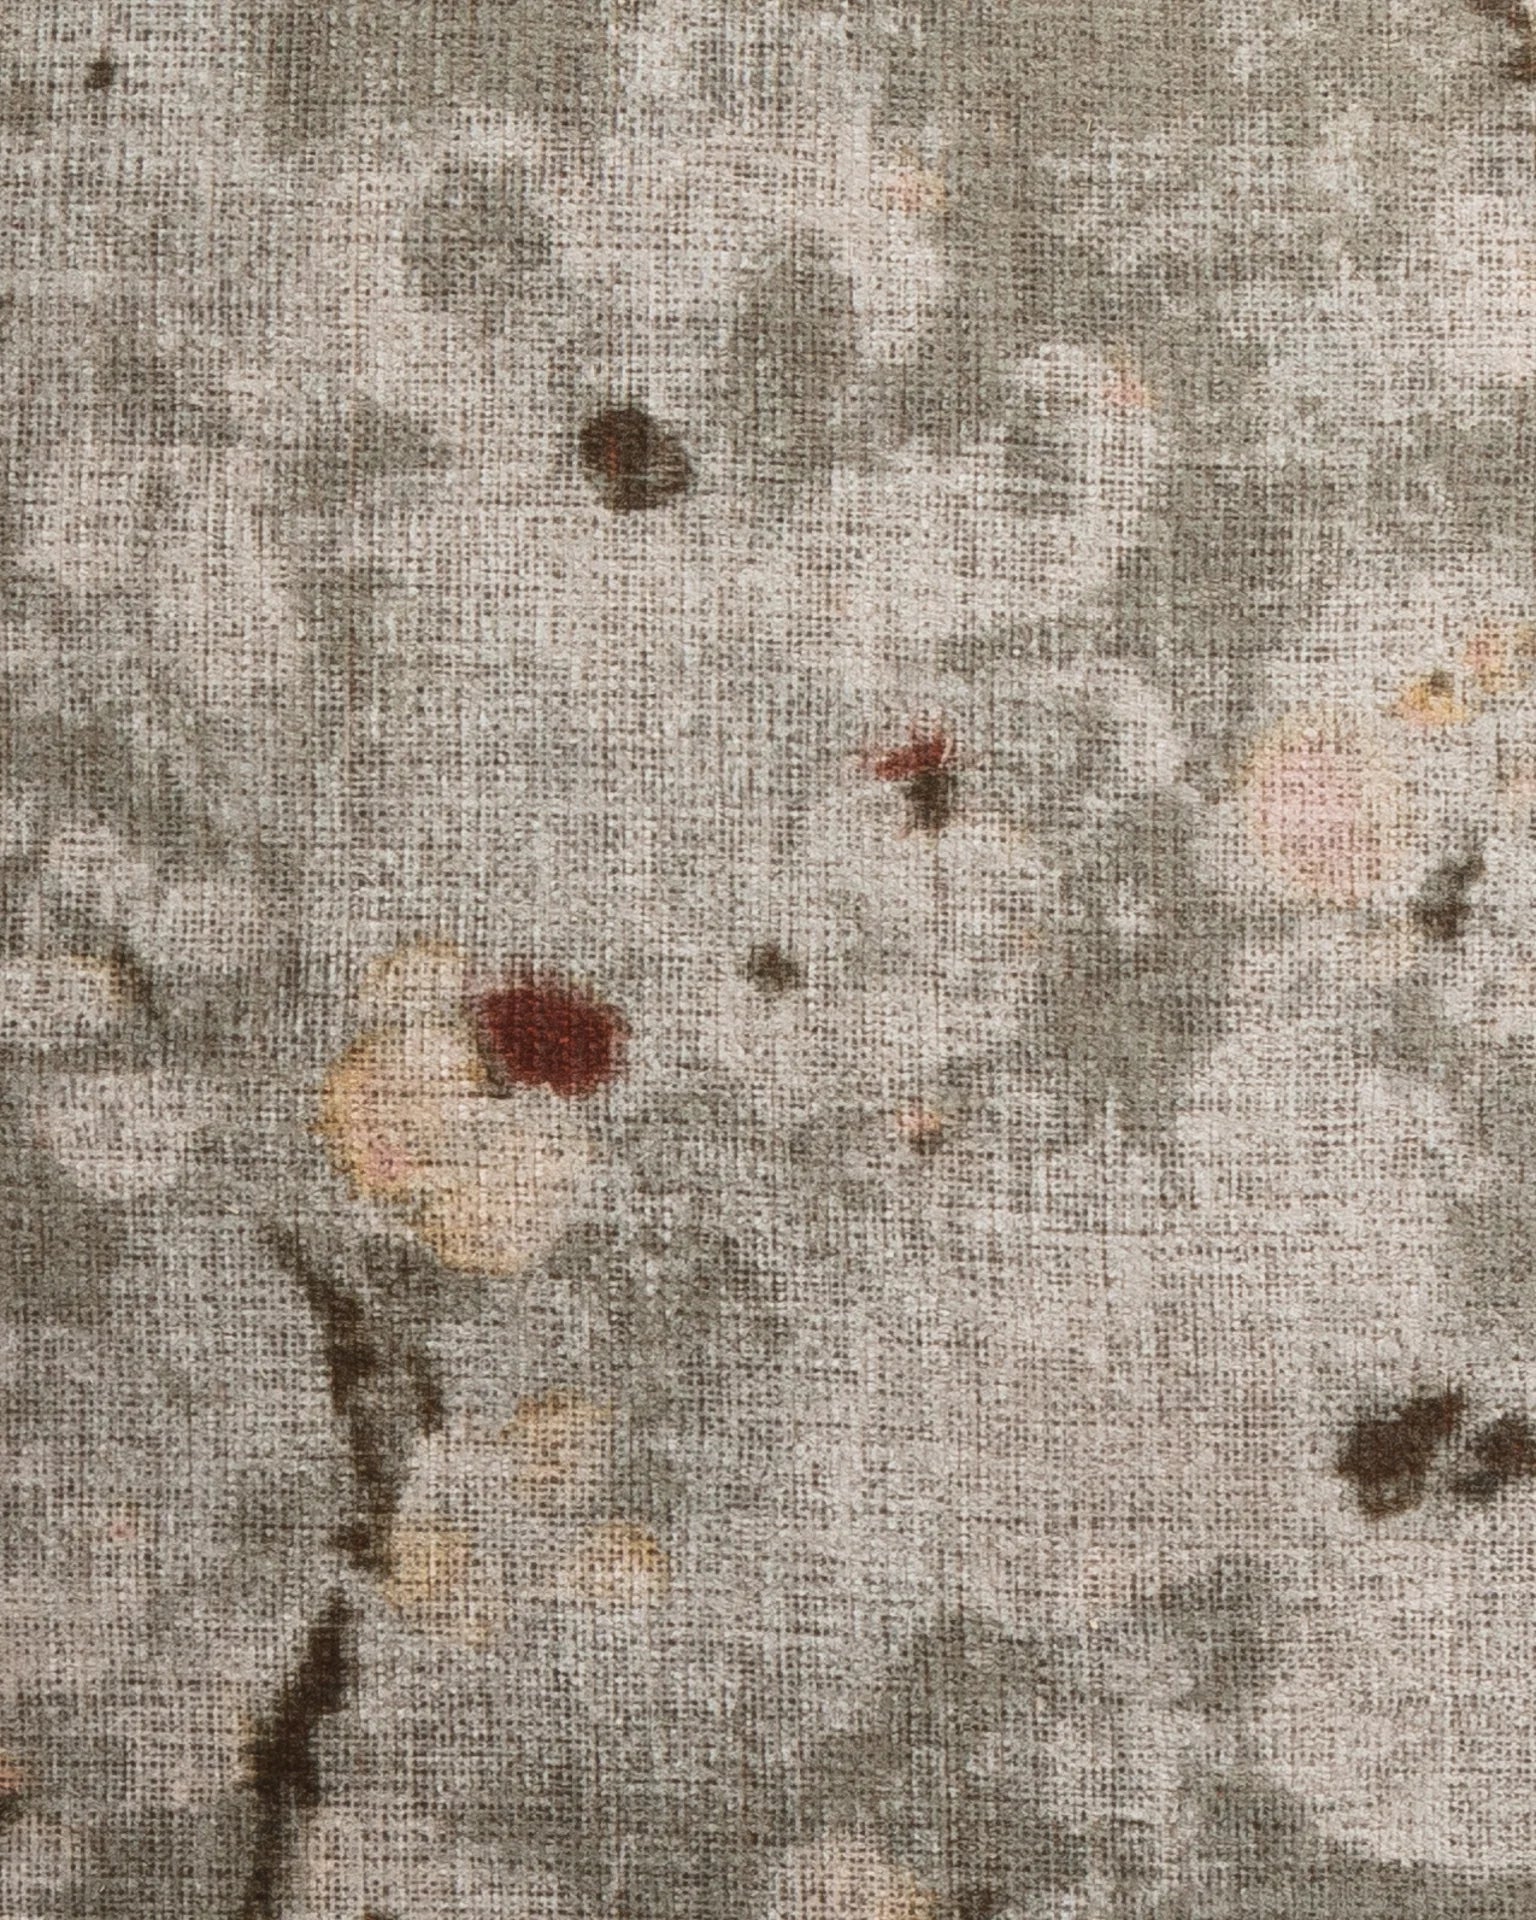 Cherry Blossom Taupe Pillow 26x26